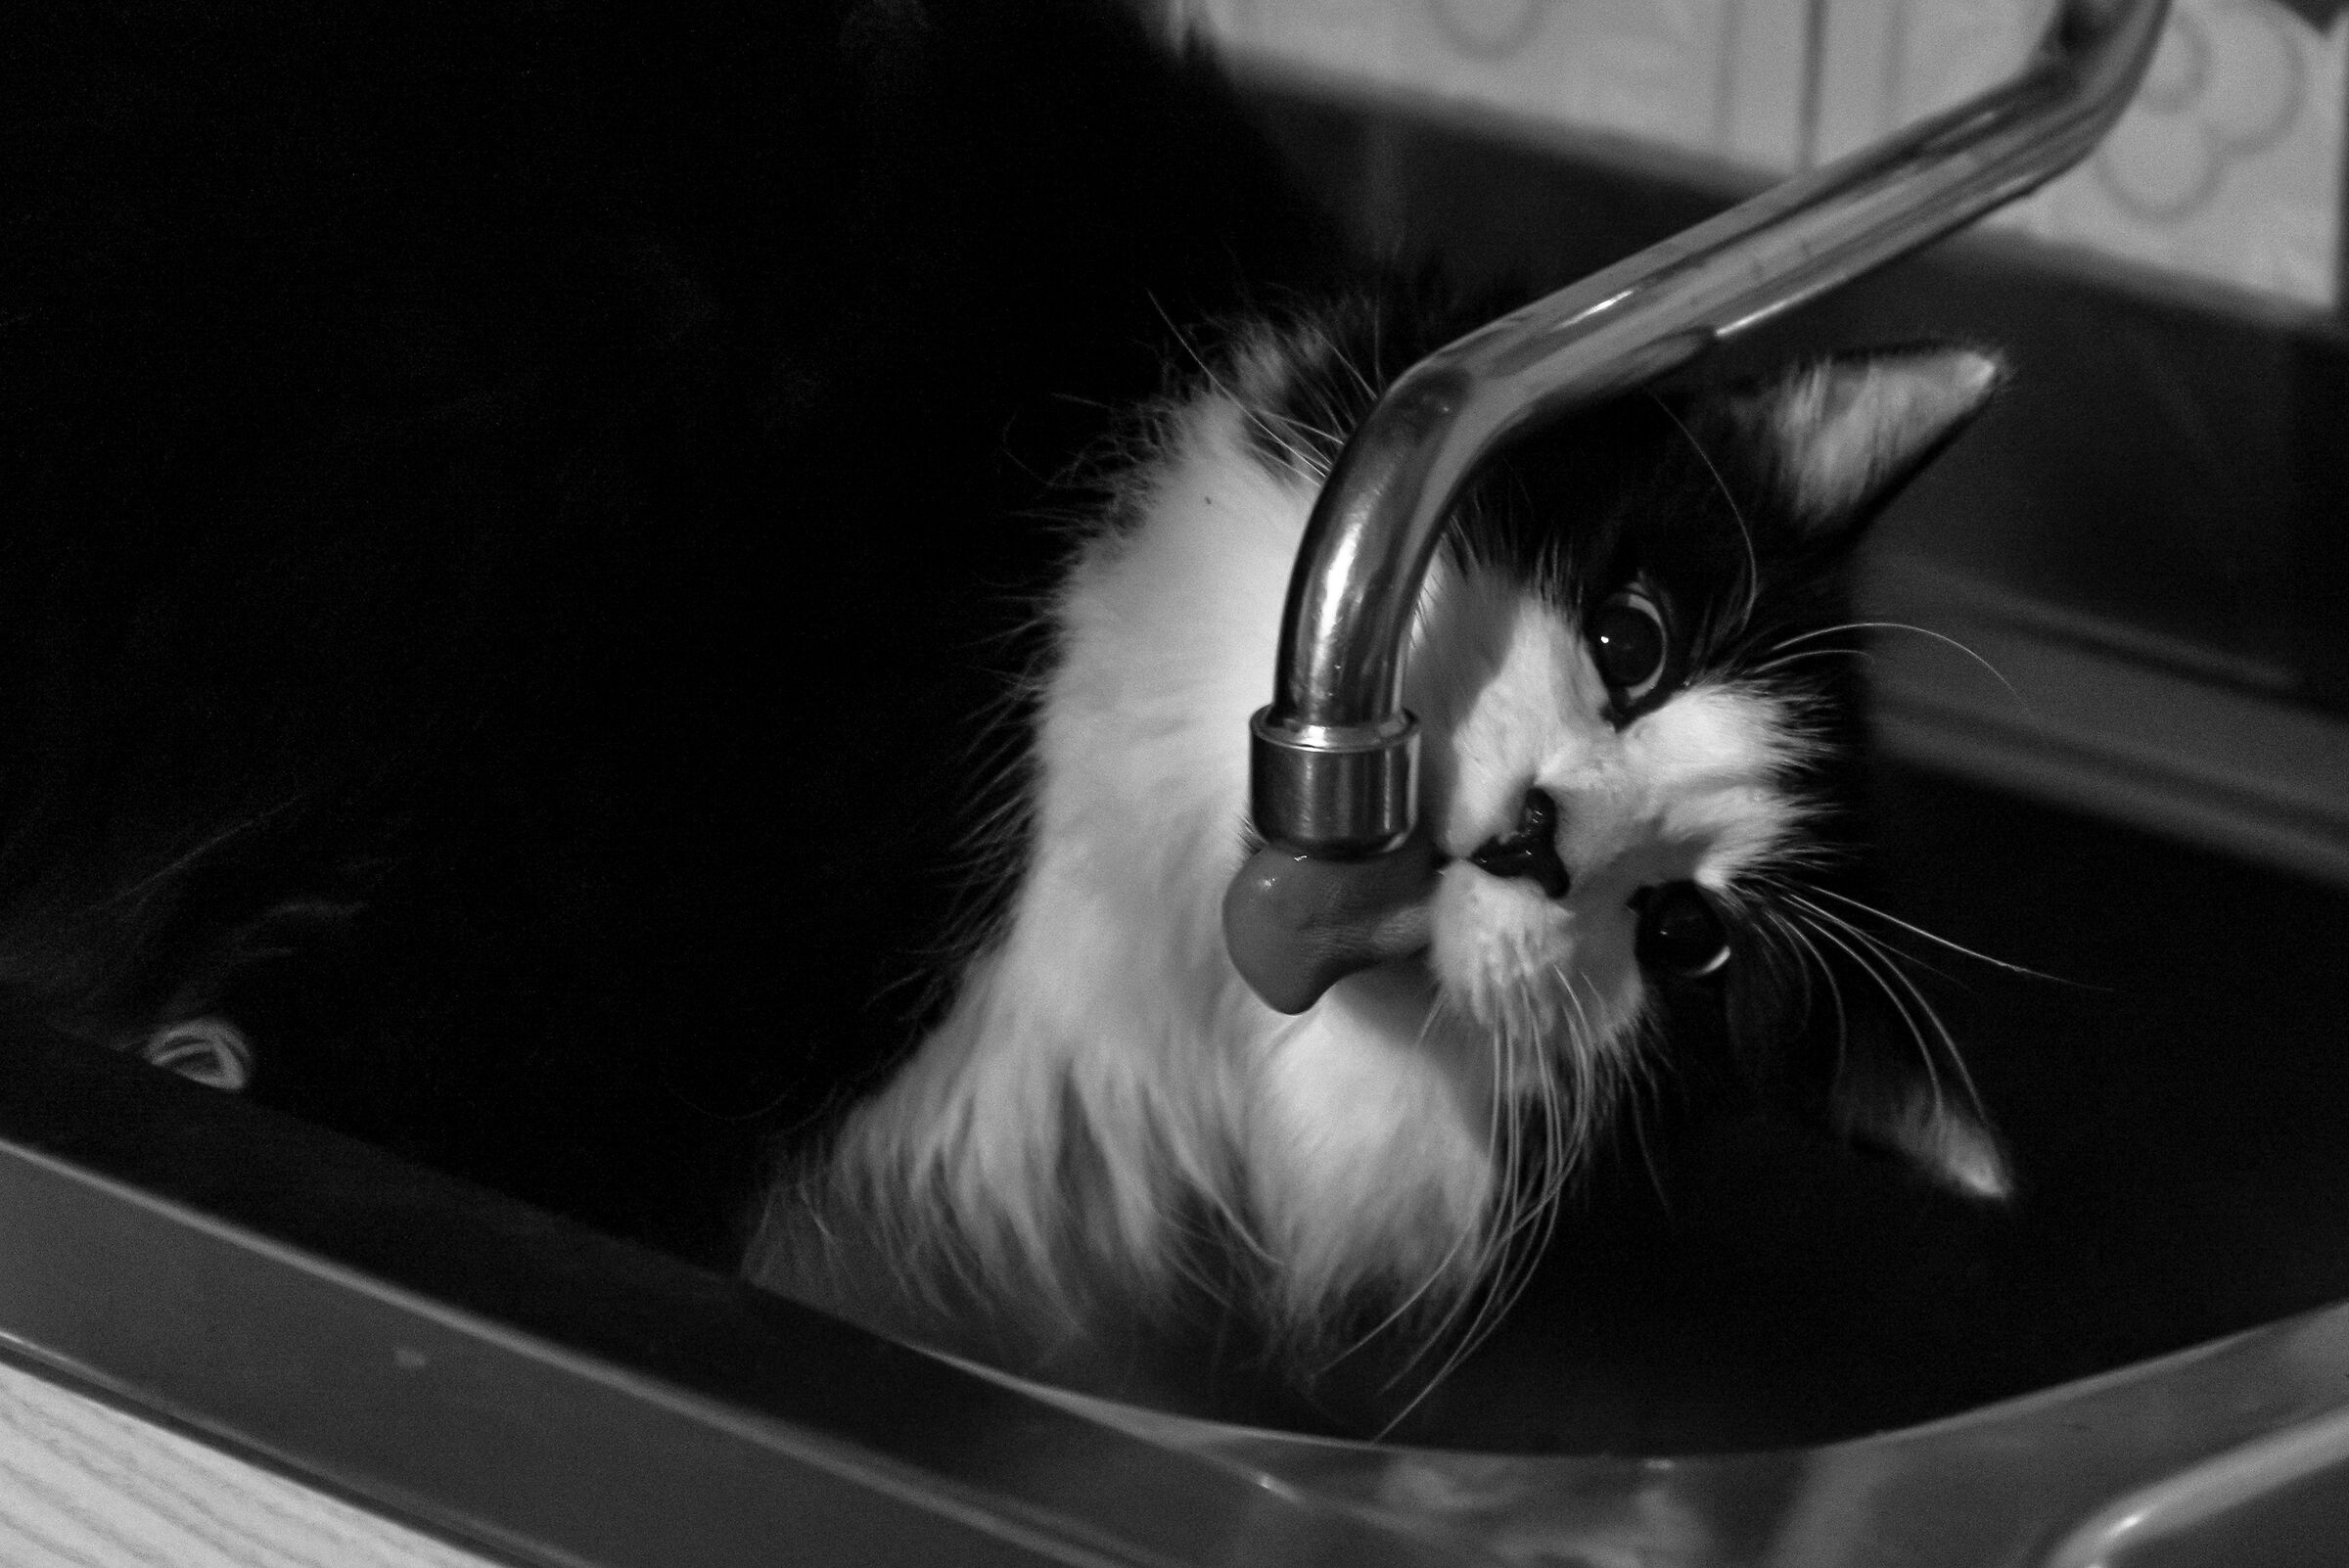 The cat is thirsty...